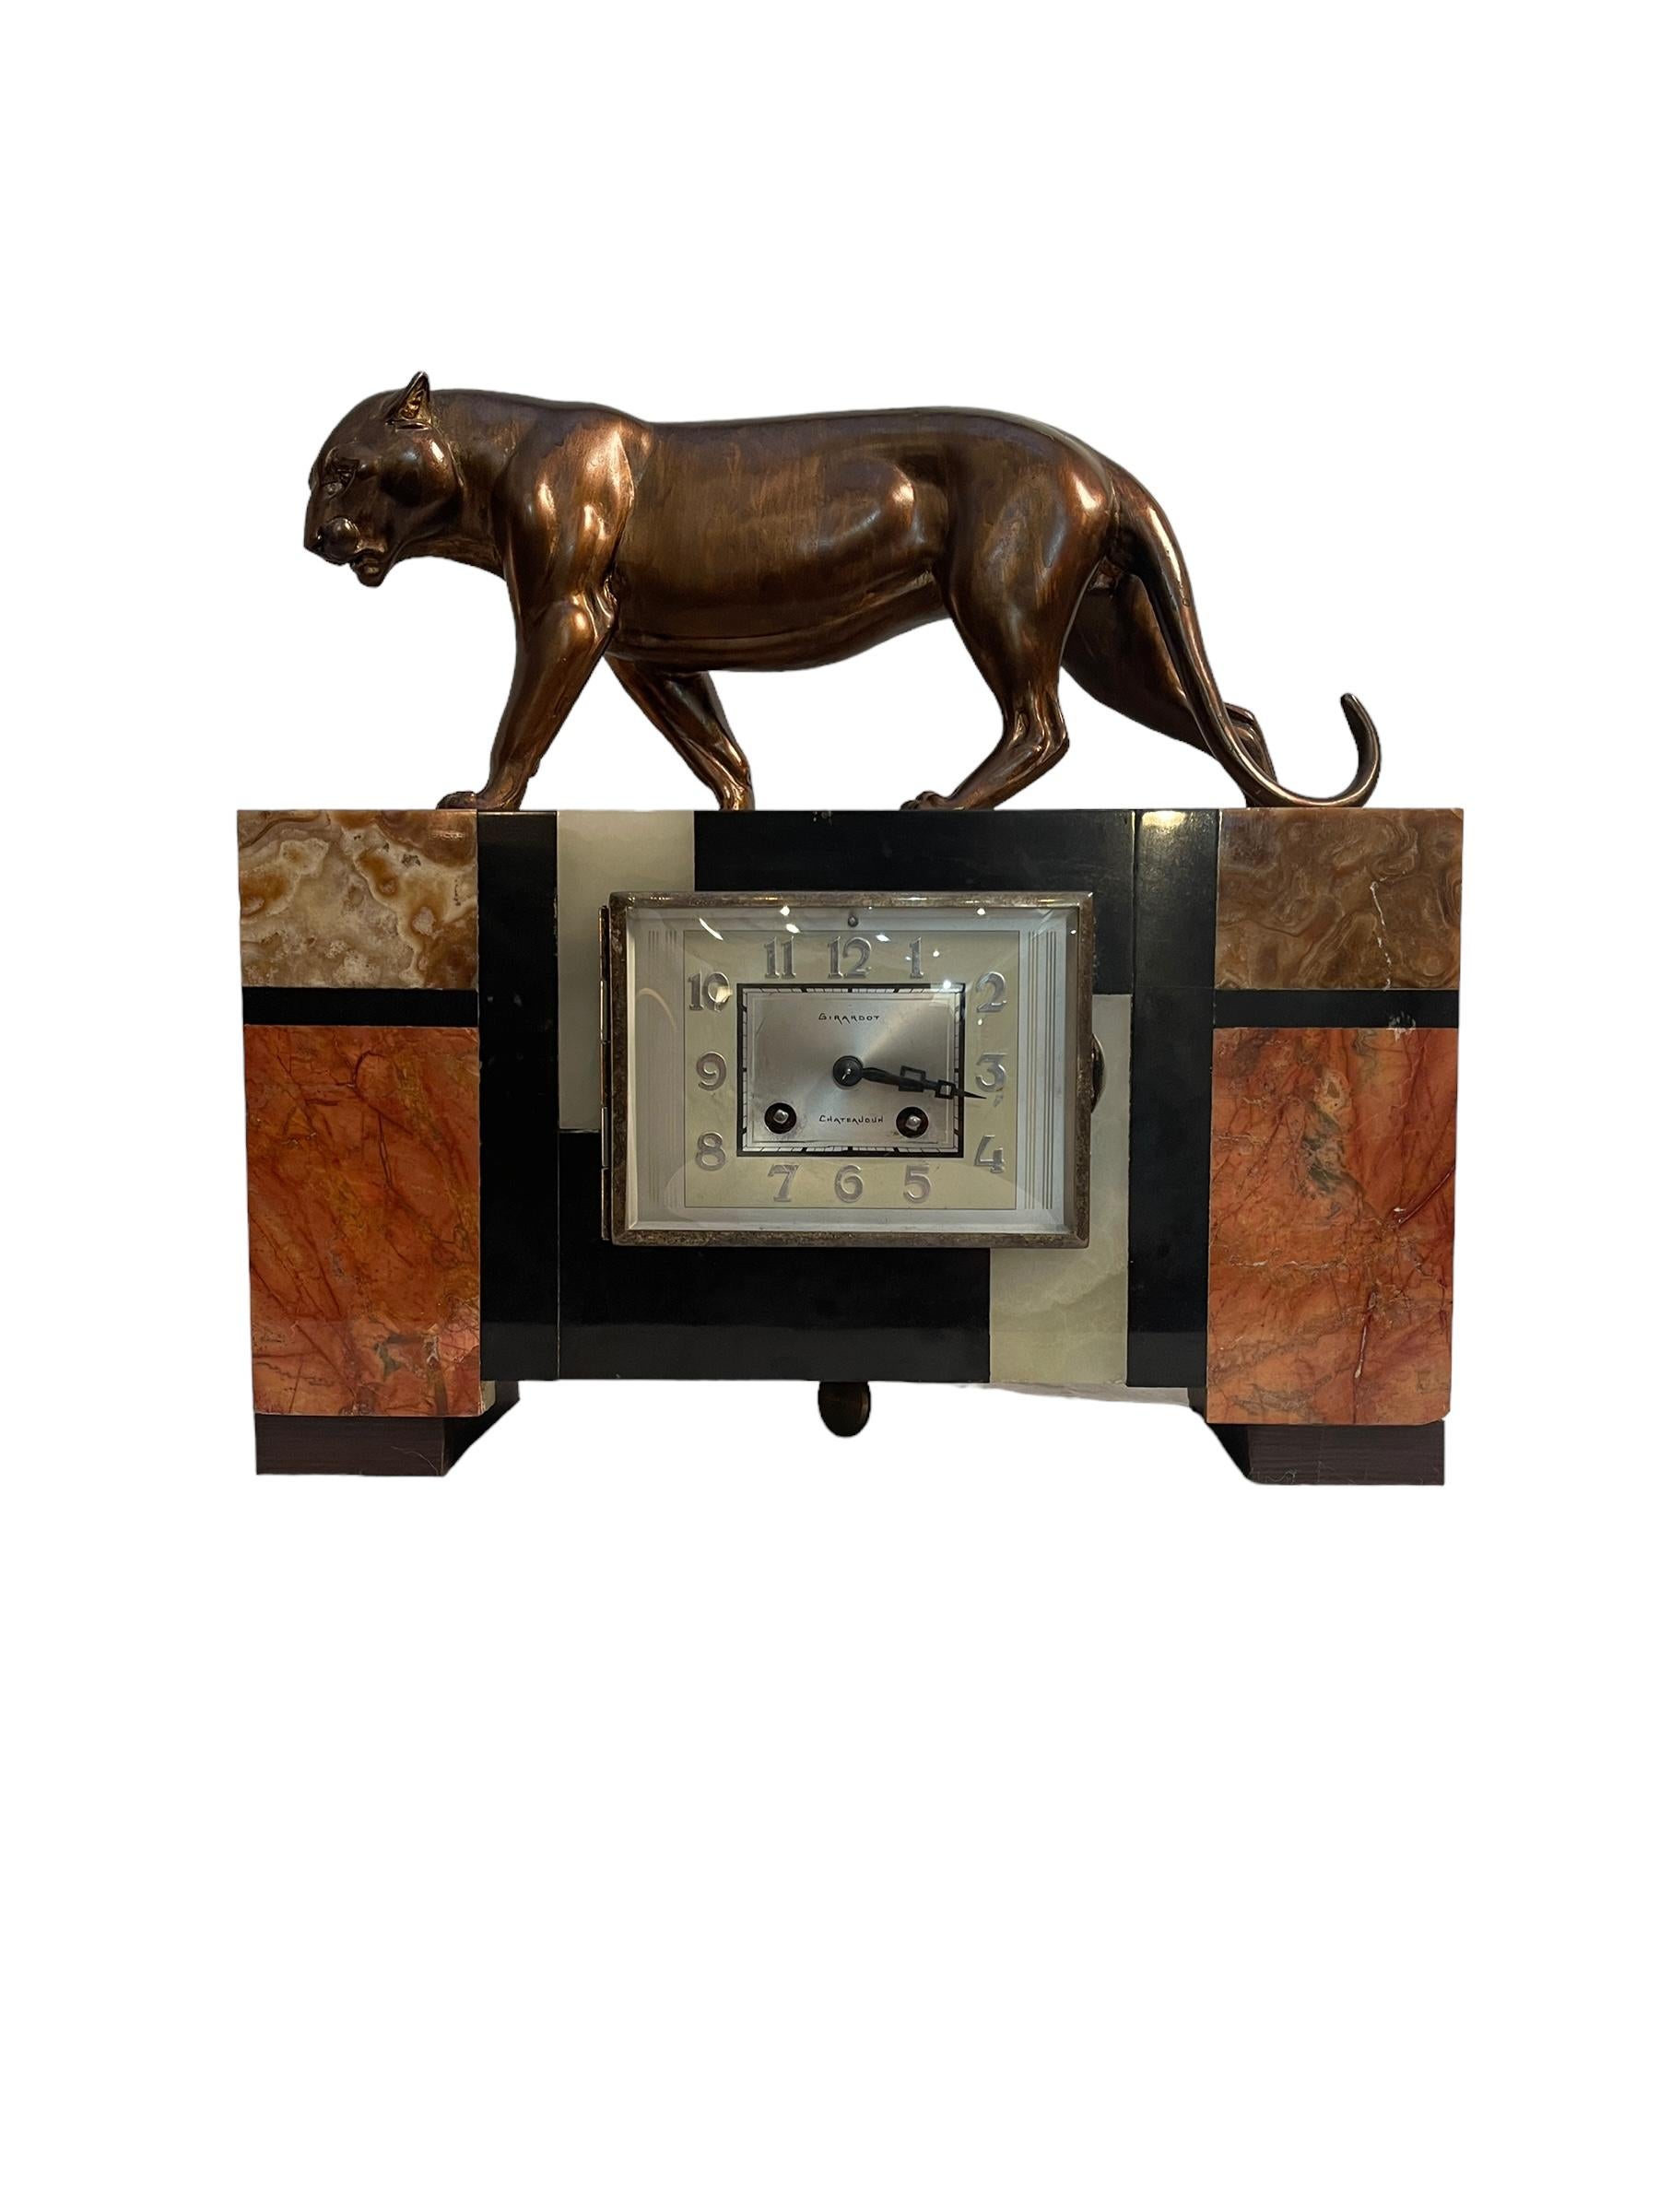 Table clock, French Art Deco, Panther
Elegant table clock, 1920s-1930s, French Art Deco, made of marble and bronze, Girardot Chateaudun brand.
In good condition, as shown in the photos, mechanism to be serviced.
Dimensions: 34x11 cm, height 32 cm